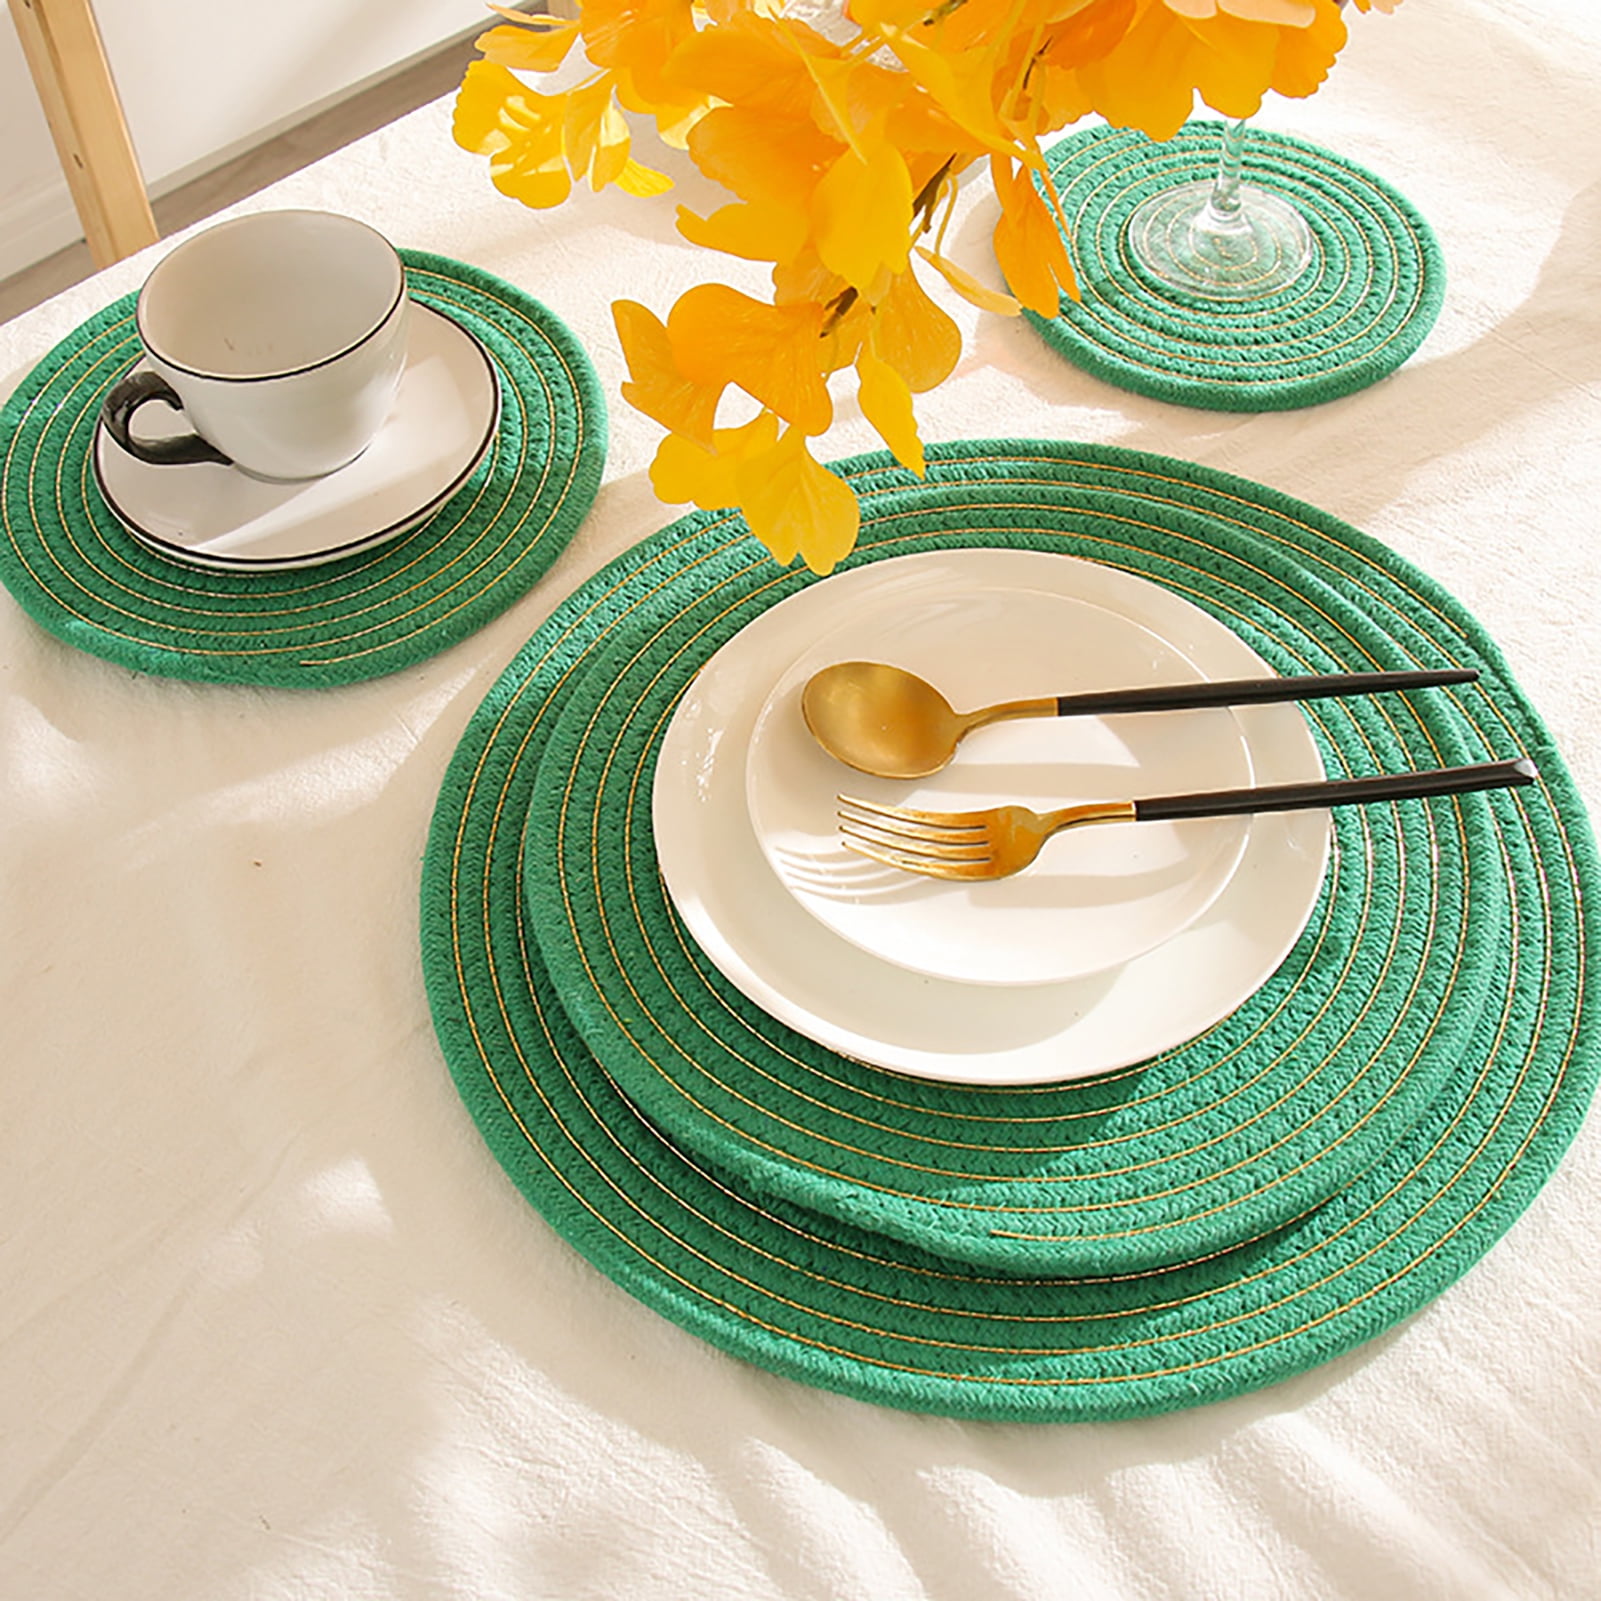 Details about   6 Pcs Natural Dining Cotton Rope Braided Coaster Mat Non Slip Decor Gift 